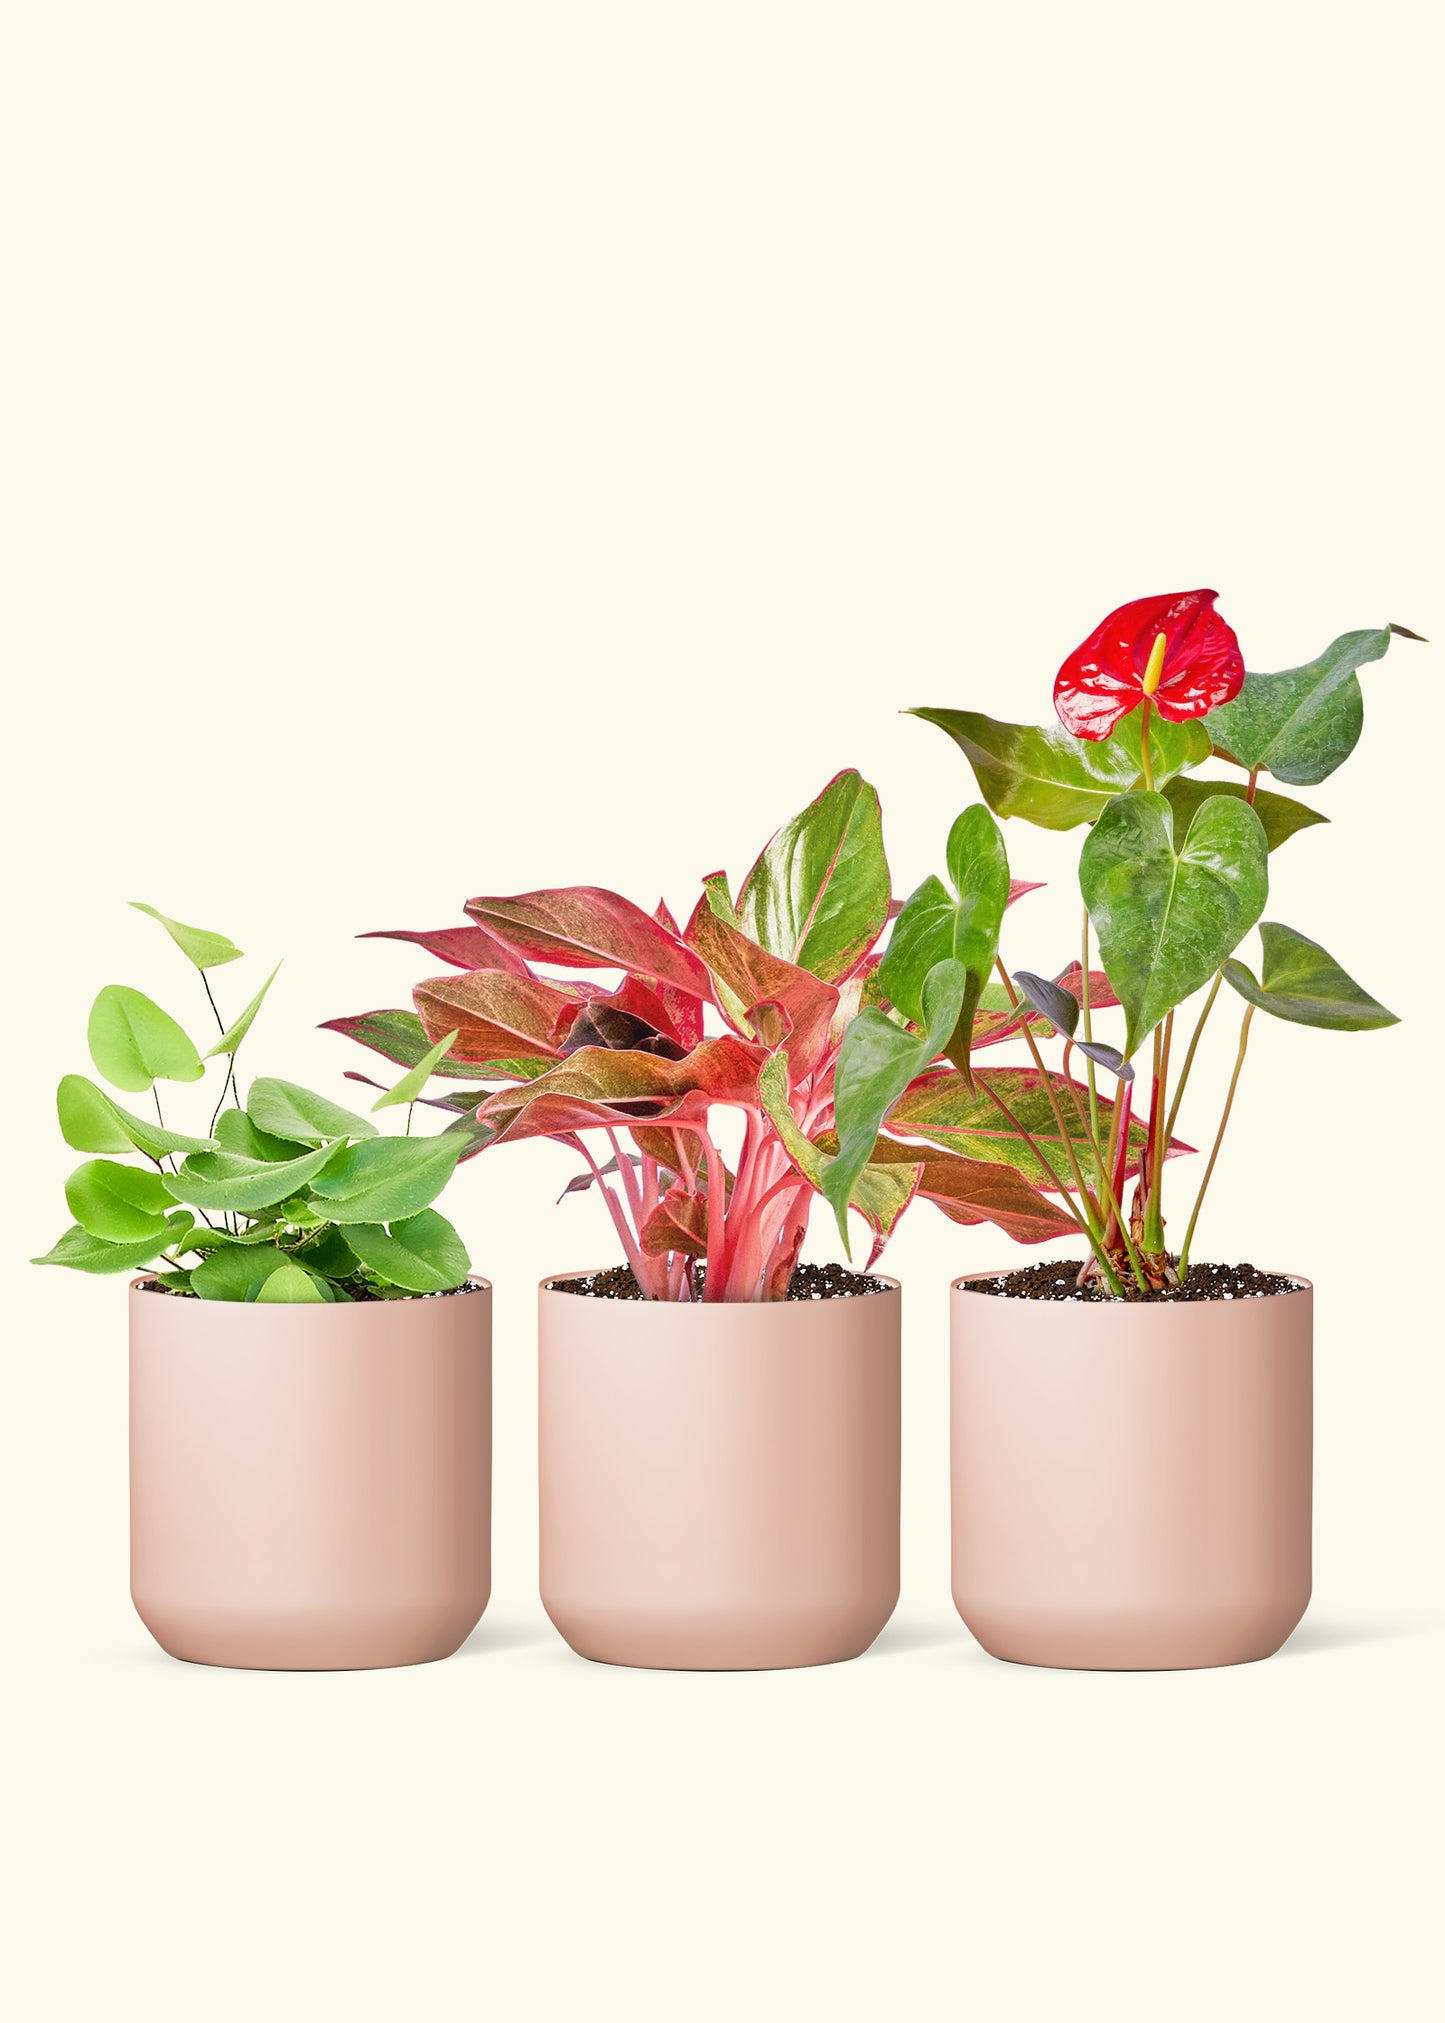 A V-Day Potted Trio - Heartleaf Fern, Aglaonema Creta and Red Anthurium in a Pink Ceramic Planter Comes with three bags of Organic Potting Mix